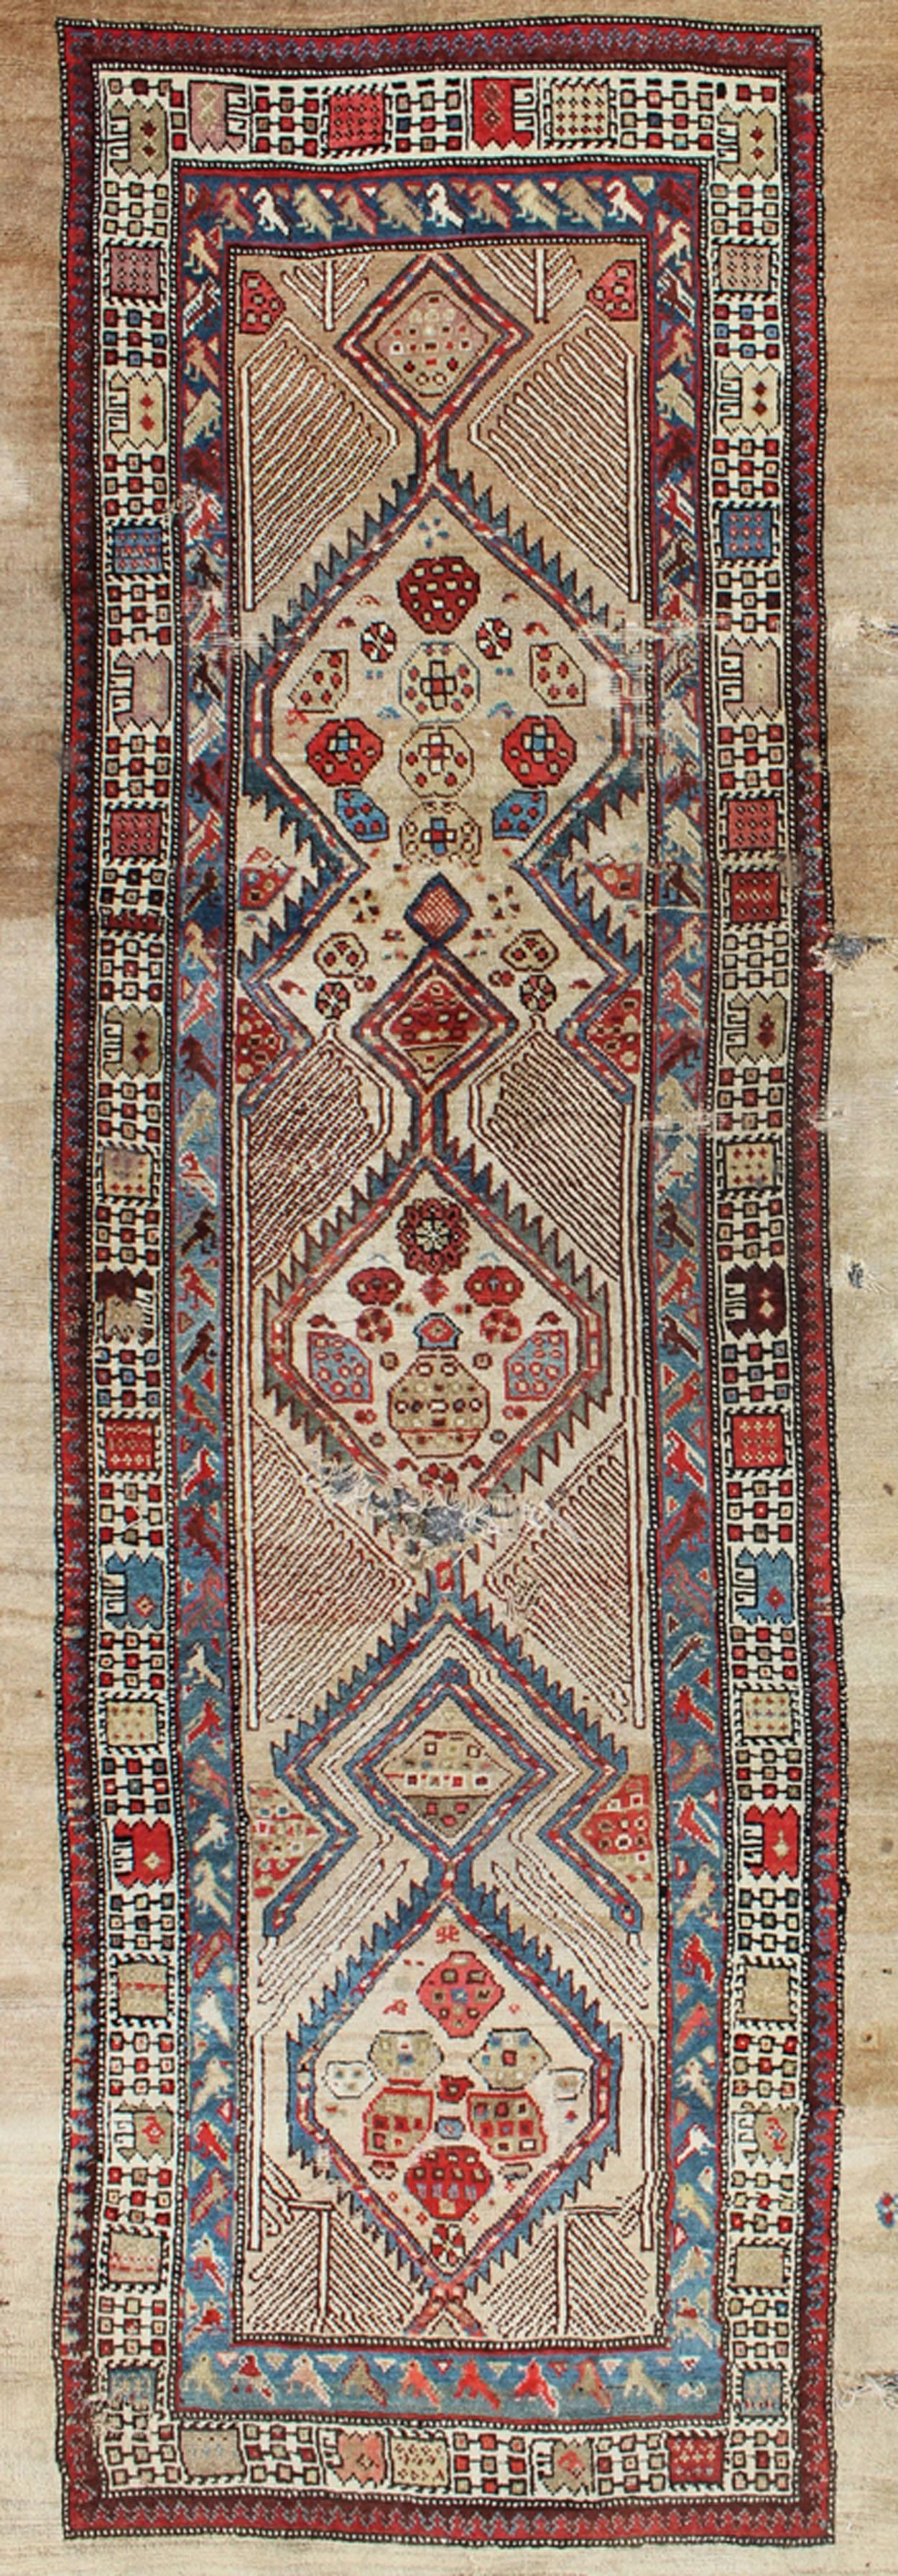 Hand-Knotted Mid-19th Century Antique Serab Runner in Ivory, Blue and Red